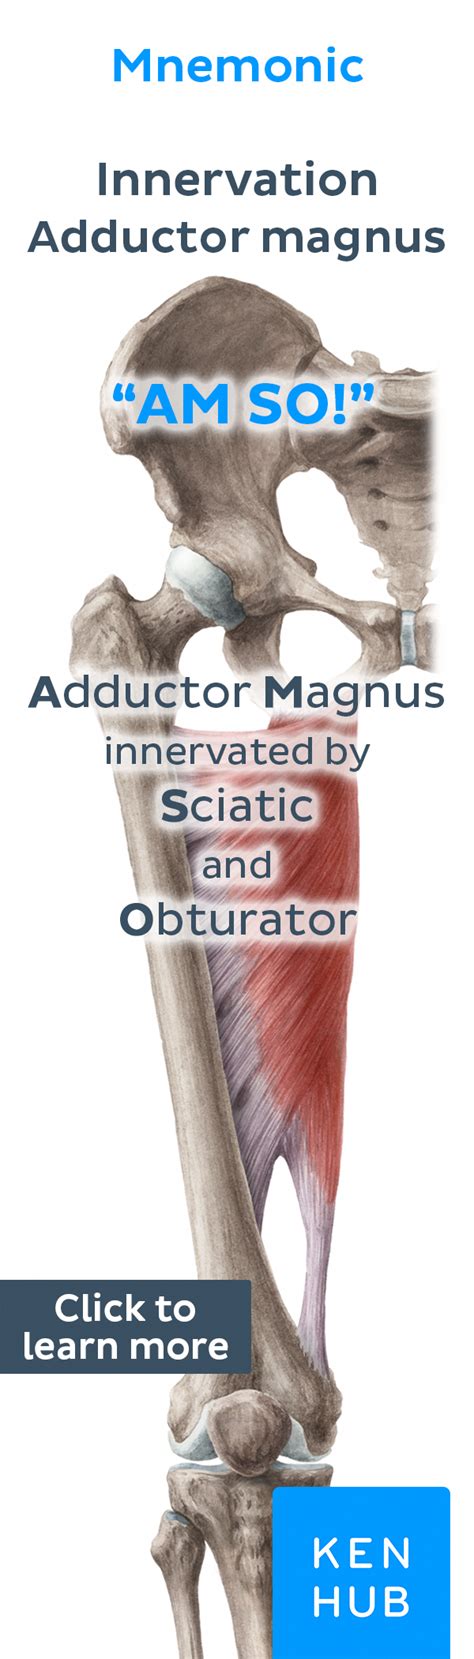 Hip Adductors Muscle Anatomy Physical Therapy School Physical